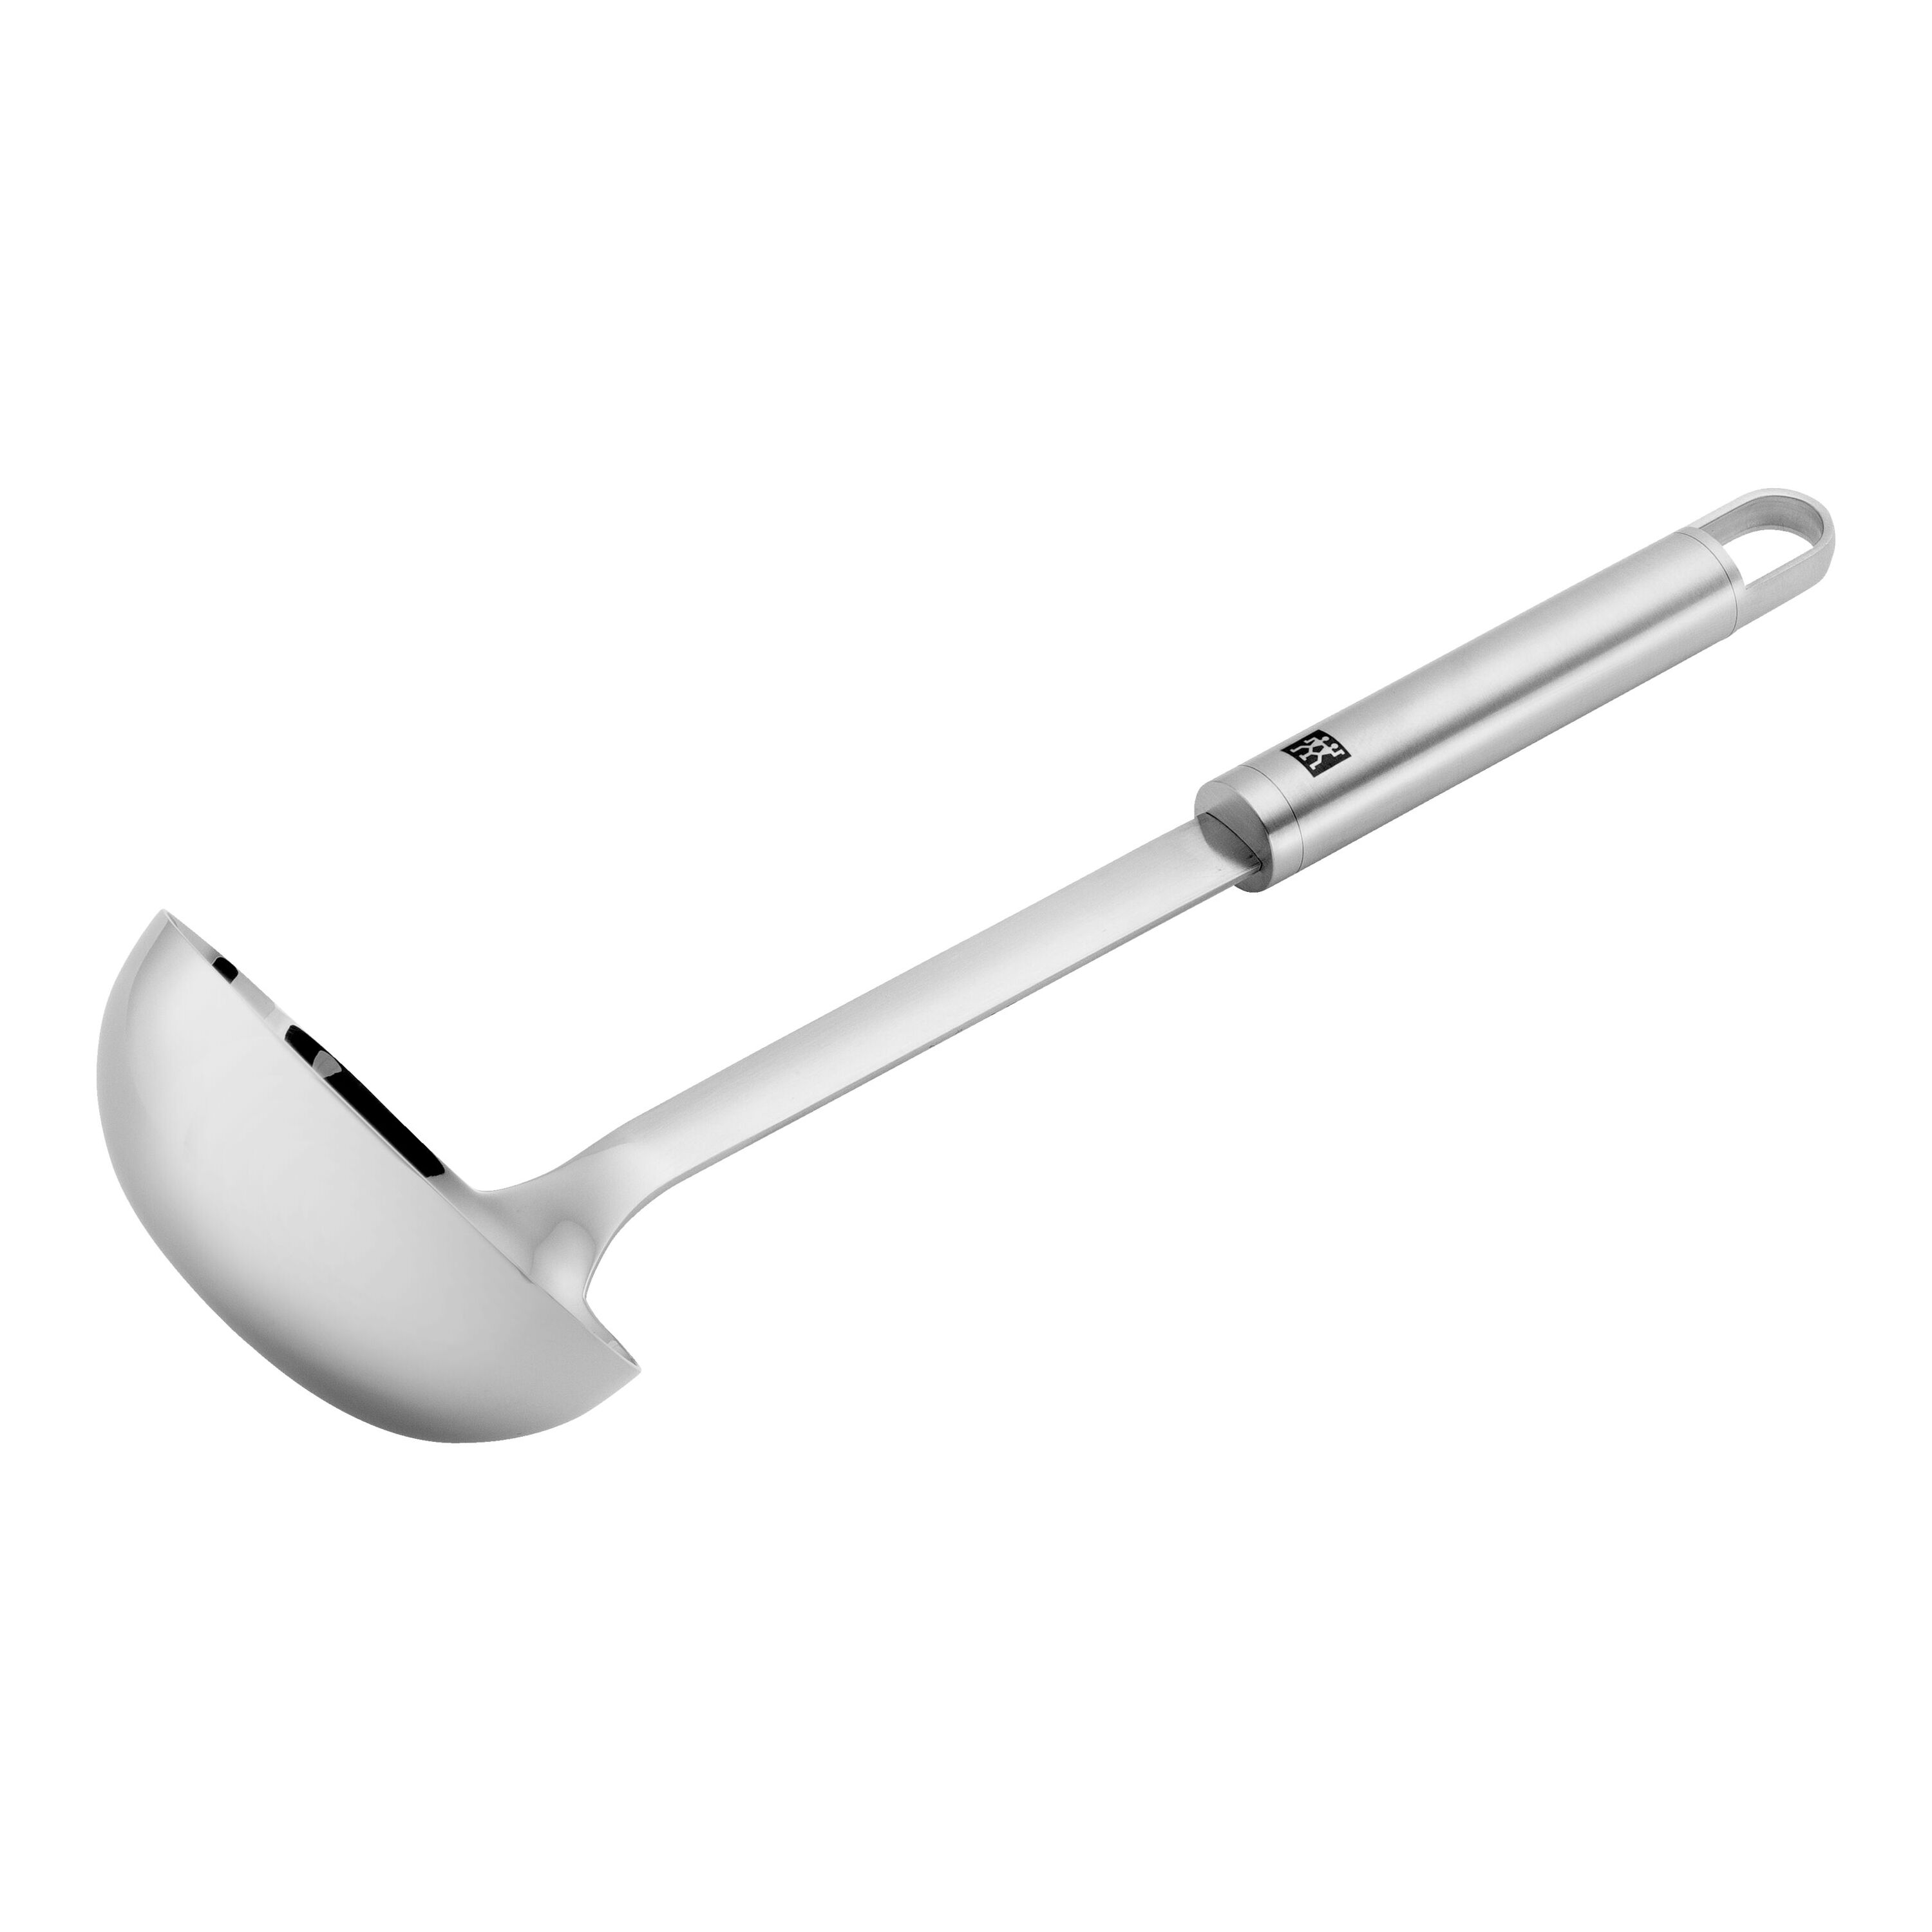 FULLYWARE 13.4-inch Soup Ladle Spoon, Adsorbable 18/10 Stainless Steel  Large Kitchen Ladle, Dishwasher Safe